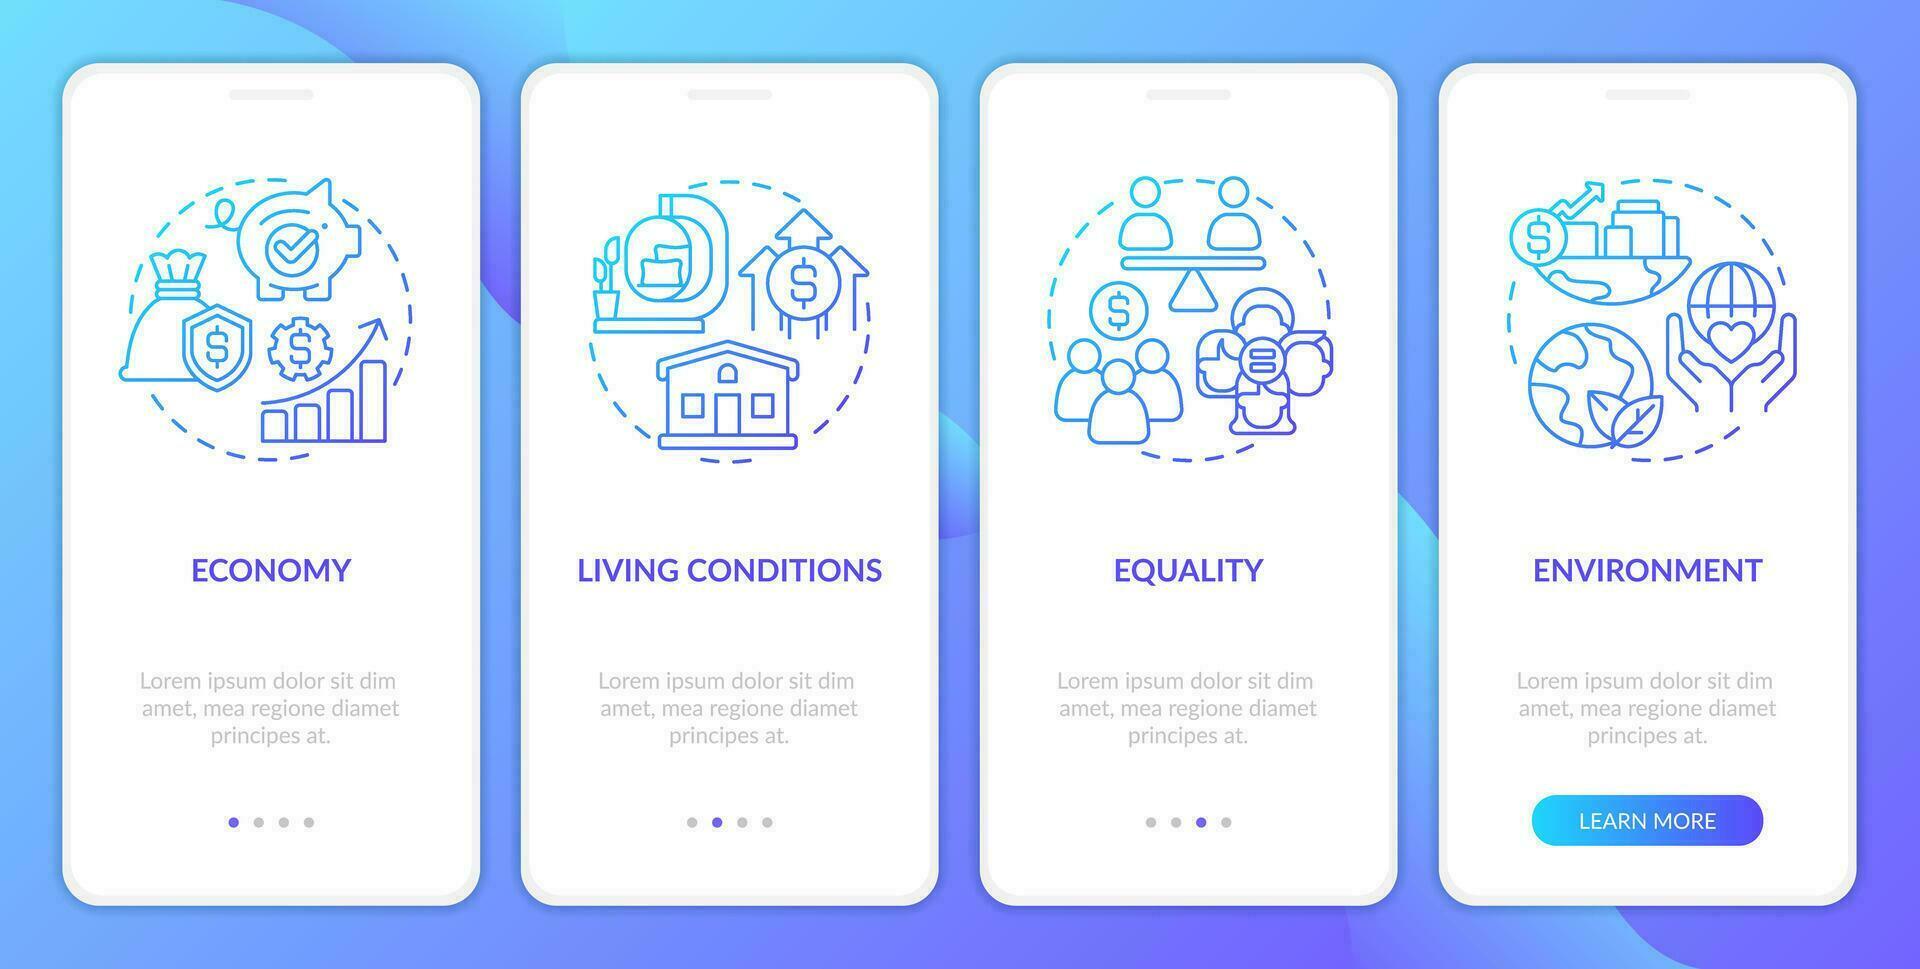 Elements of inclusive growth index blue gradient onboarding mobile app screen. Walkthrough 4 steps graphic instructions with linear concepts. UI, UX, GUI templated vector